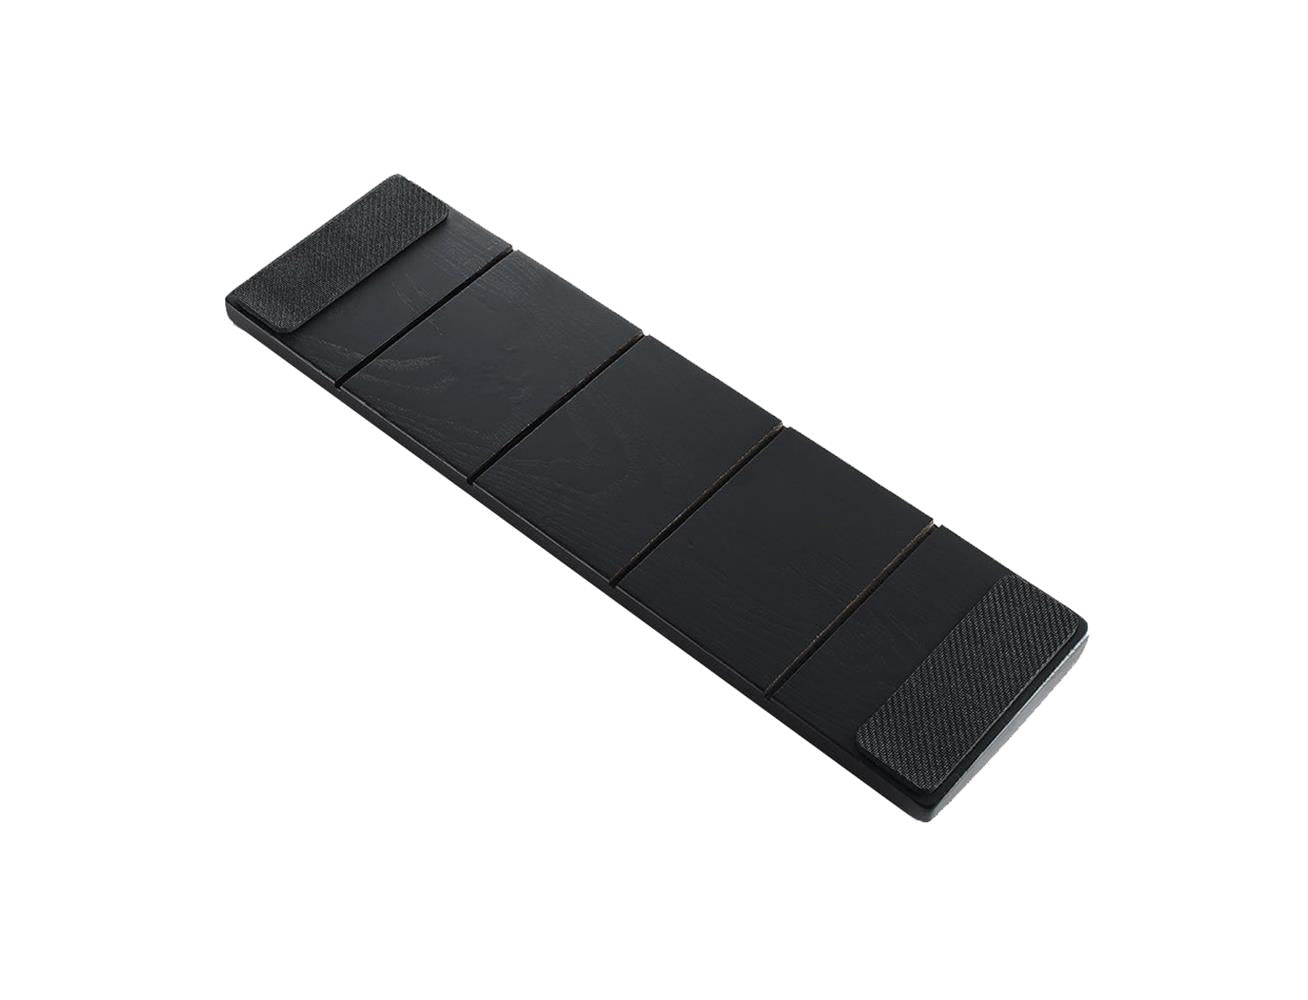 Glorious PC Gaming Race Wooden Wrist Rest - Compact 12x4 inches - Black